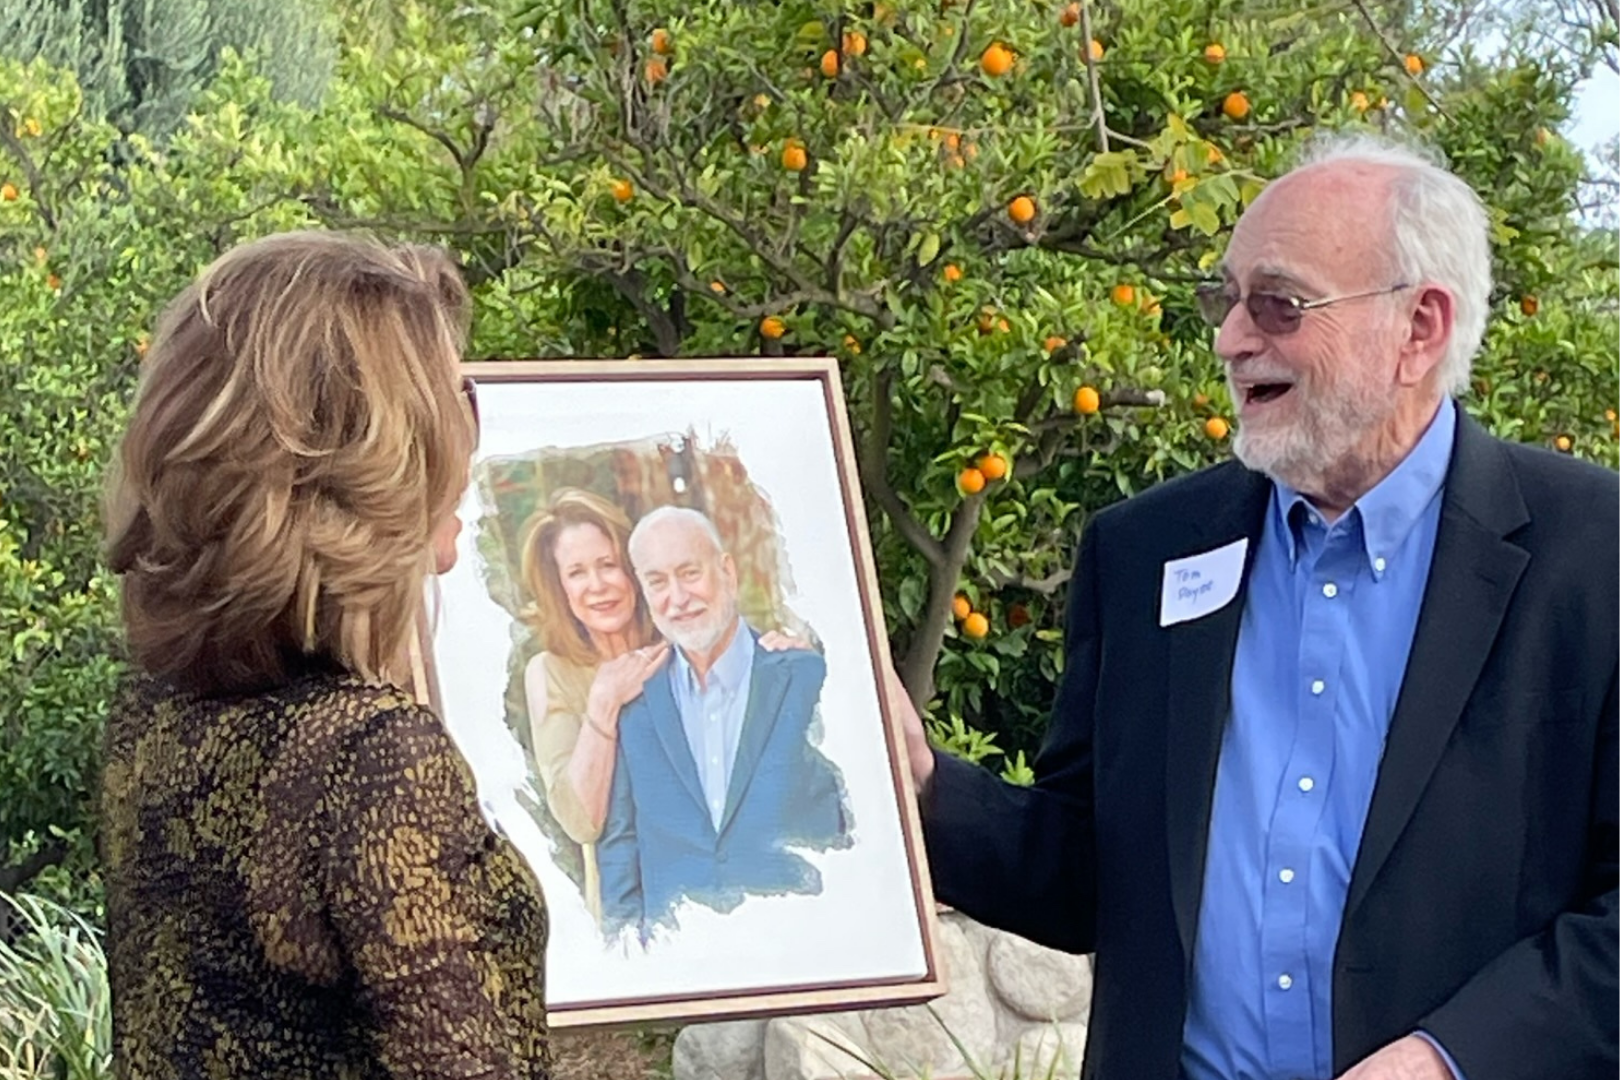 Professor Tom Payne and his wife Valerie are surprised with a portrait on canvas.